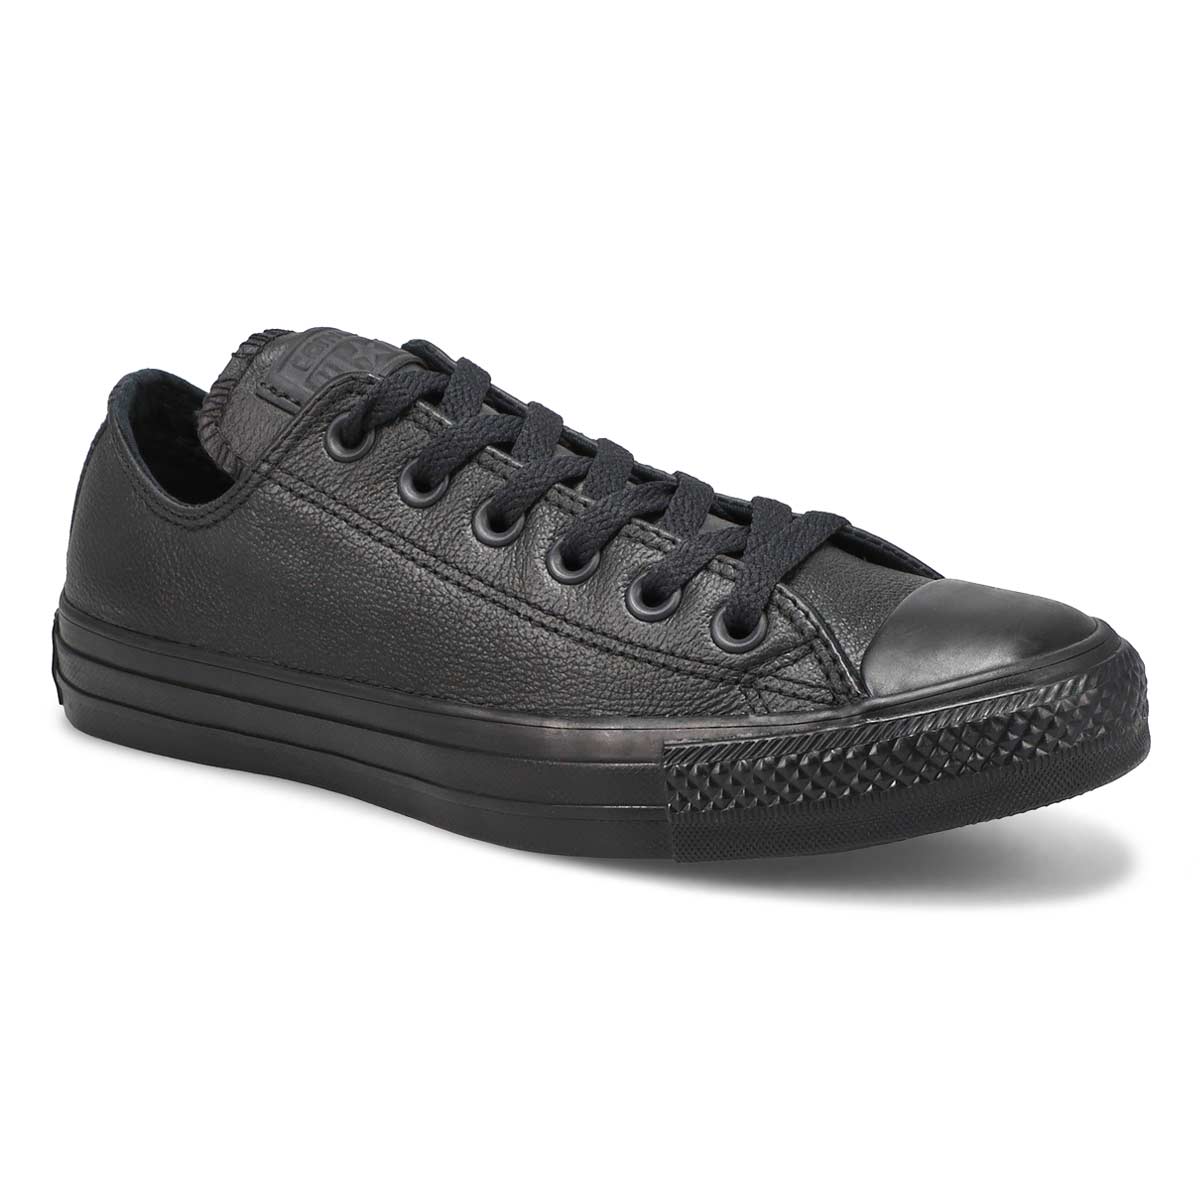 Converse Women's CT ALL STAR LEATHER black mono sneakers